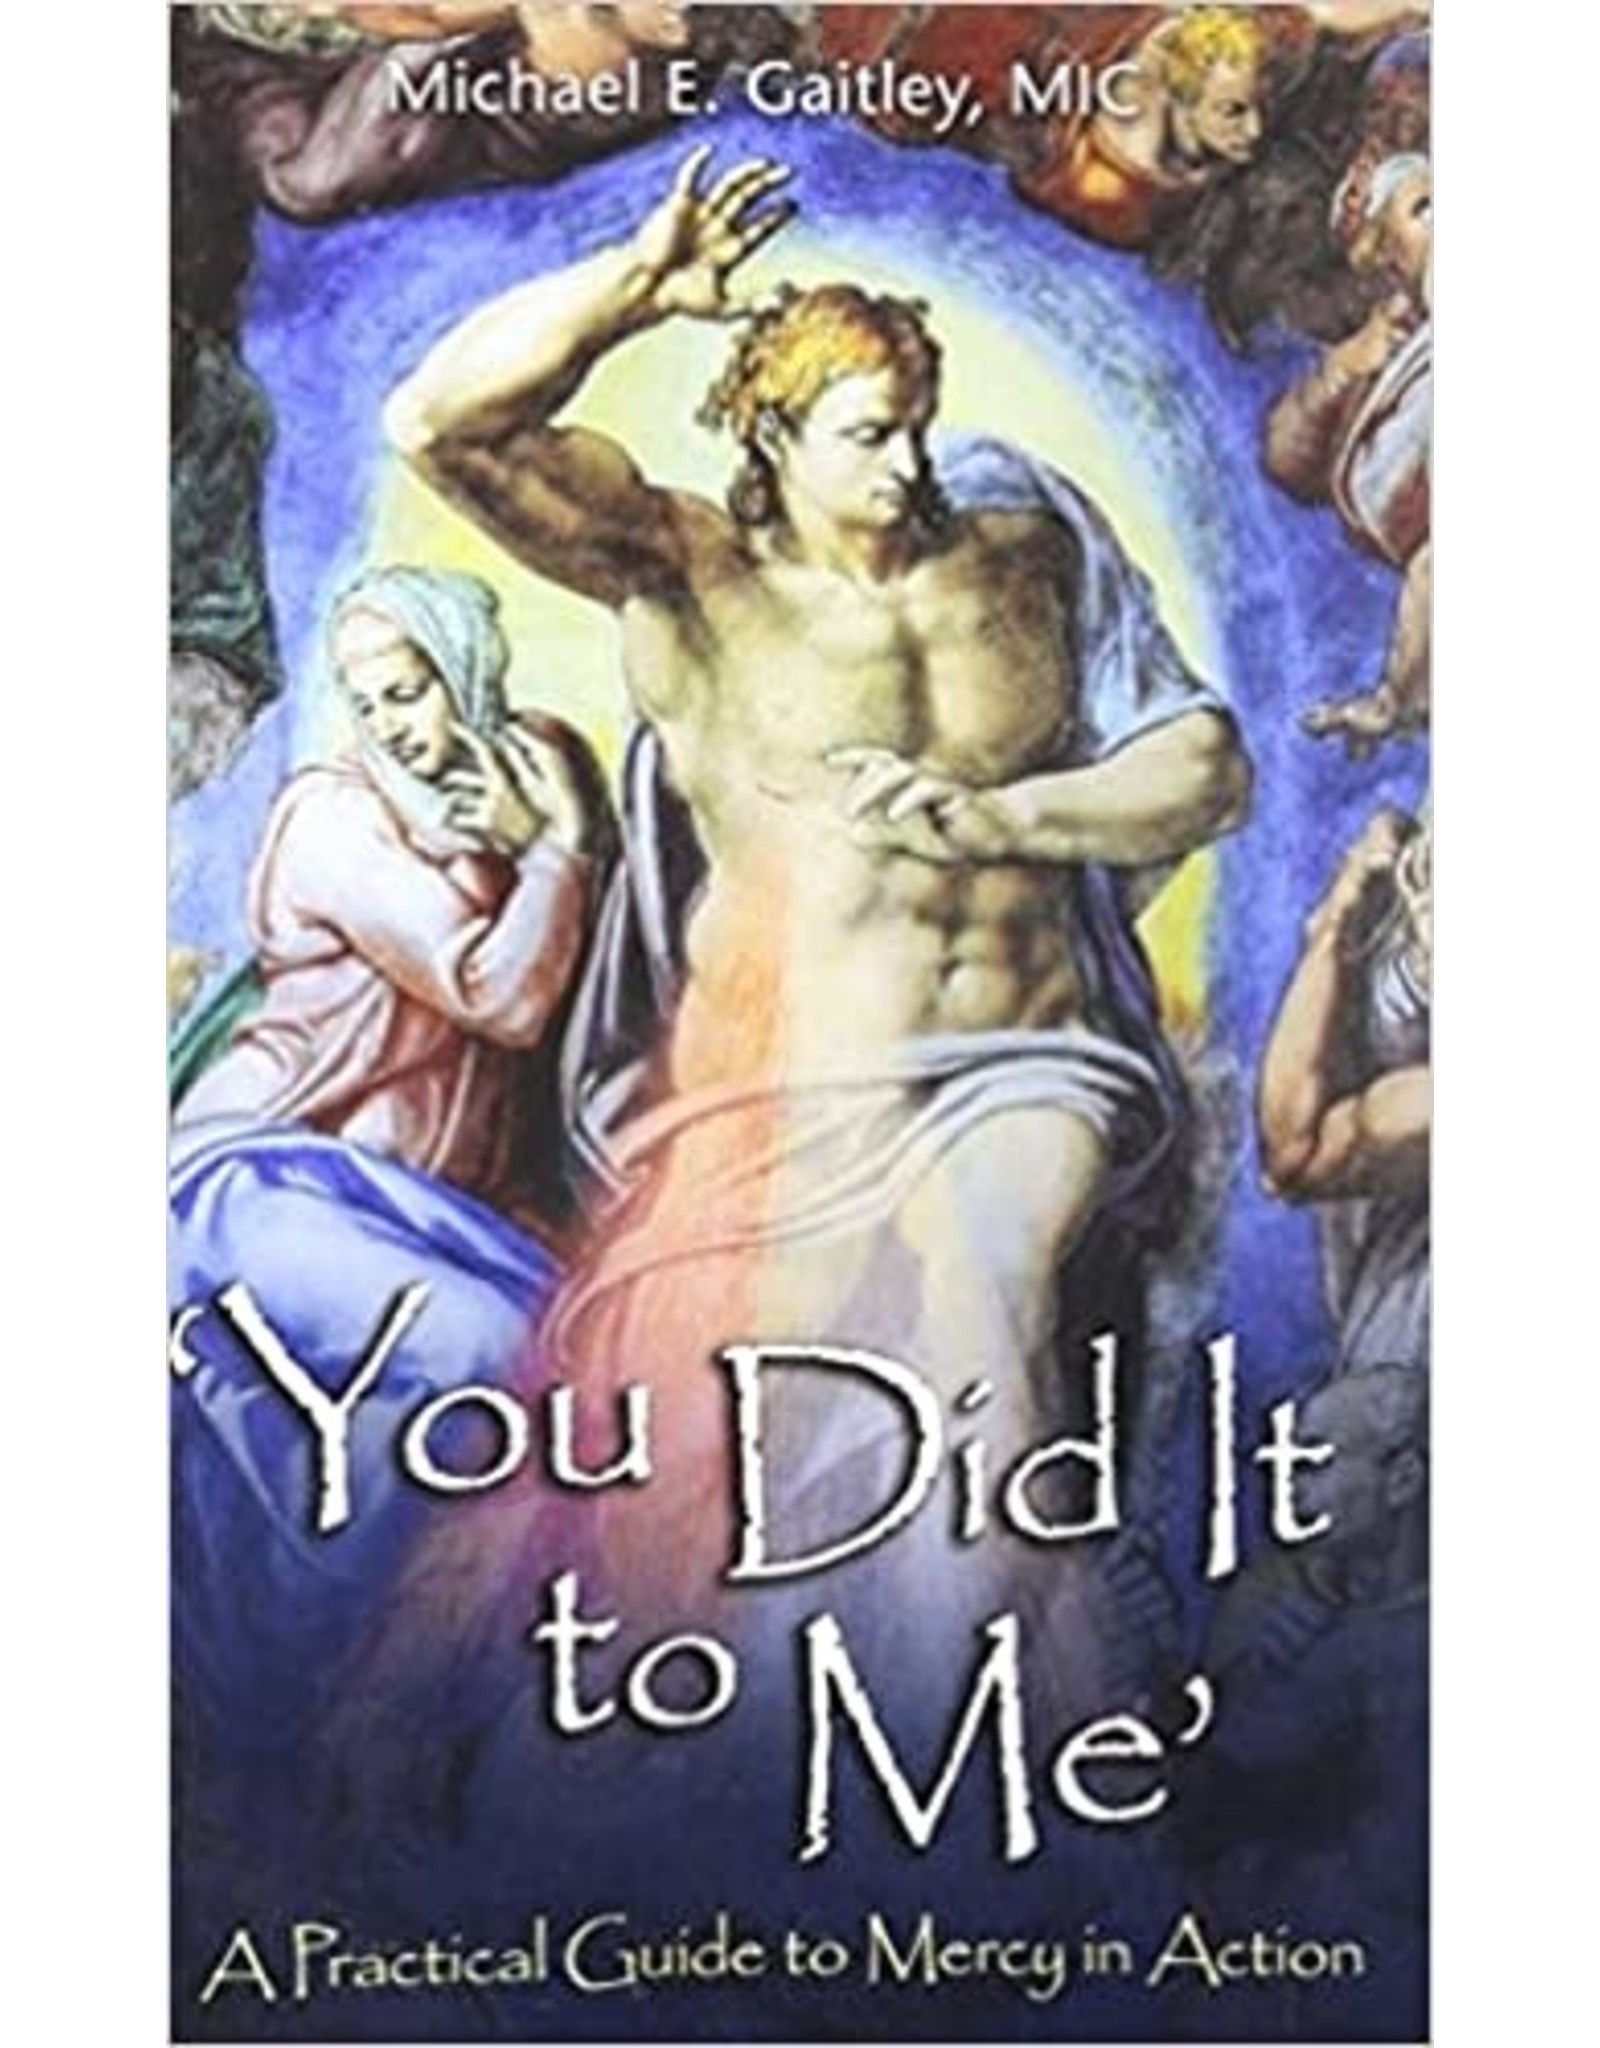 Association of Marian Helpers You Did It to Me: A Practical Guide to Mercy in Action by Michael E. Gaitley, MIC (Paperback)